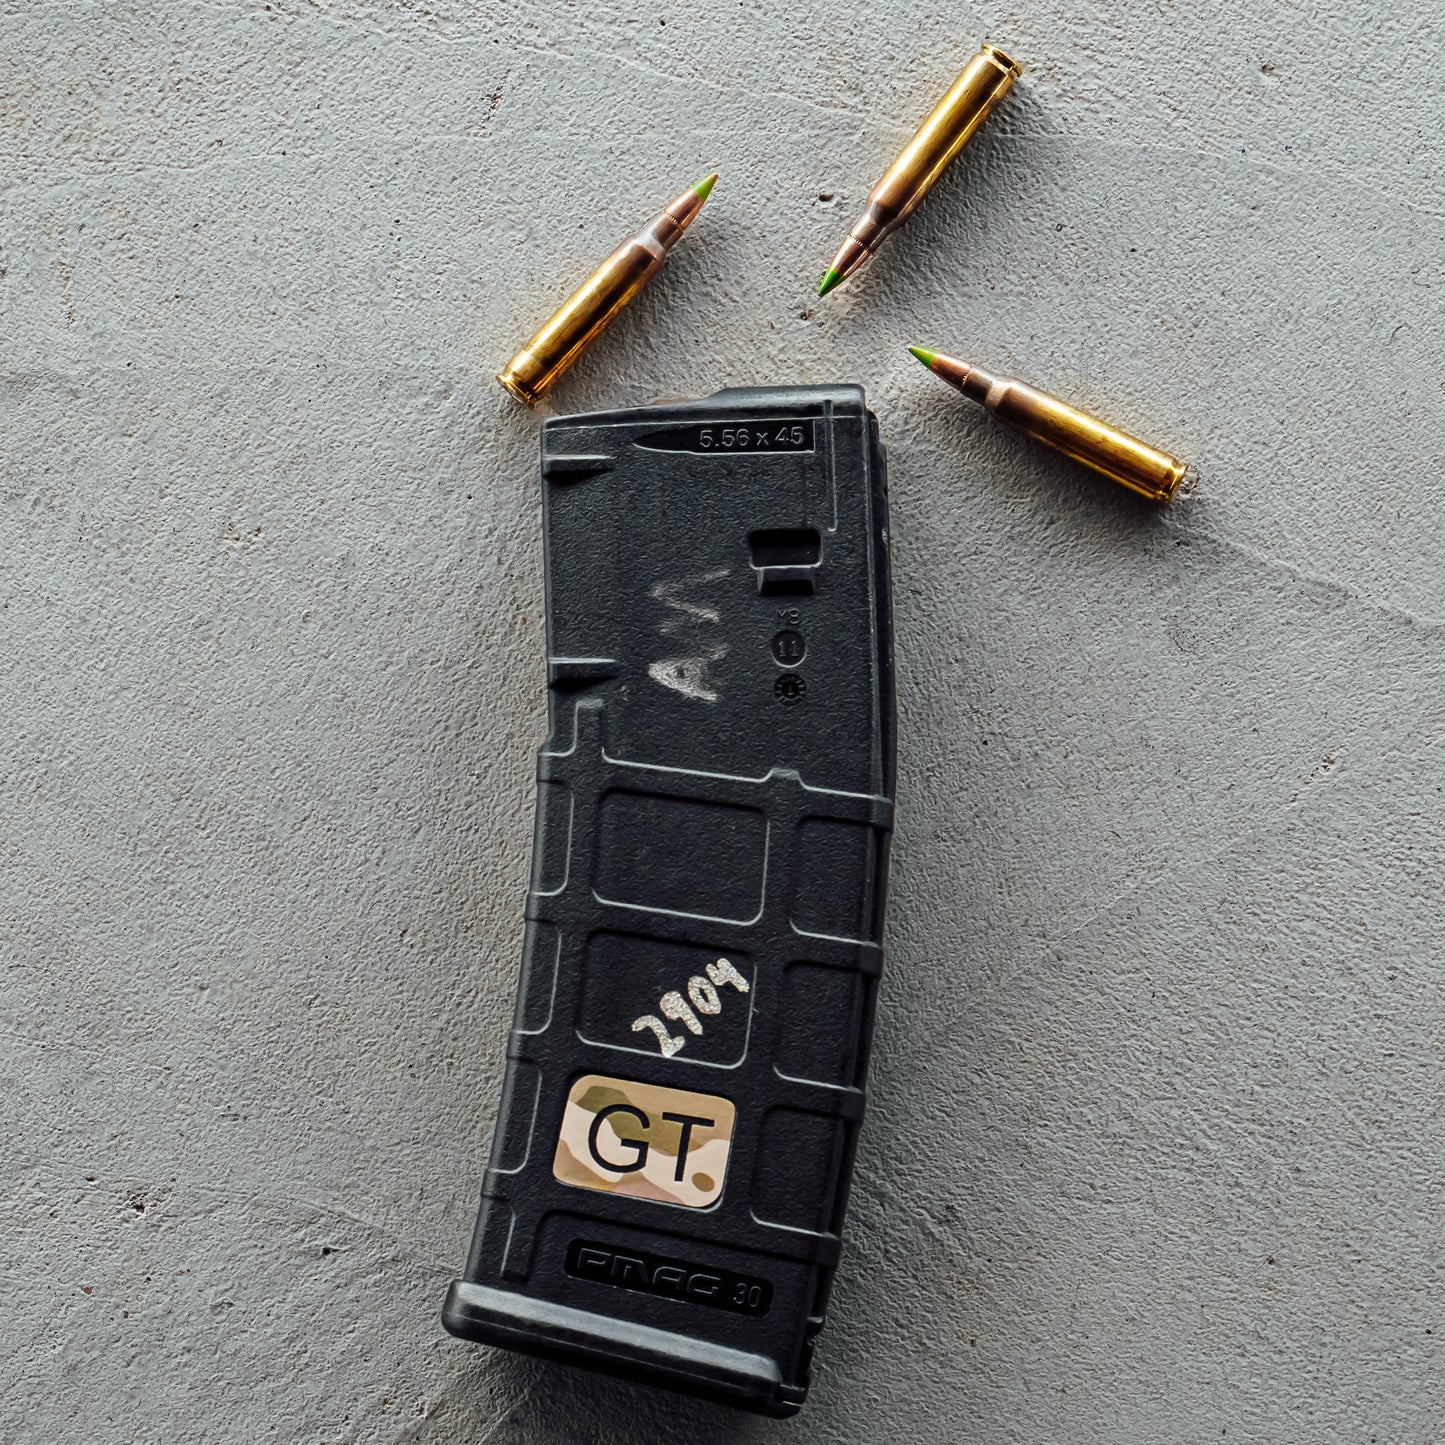 5.56 Pmag ammo type labels